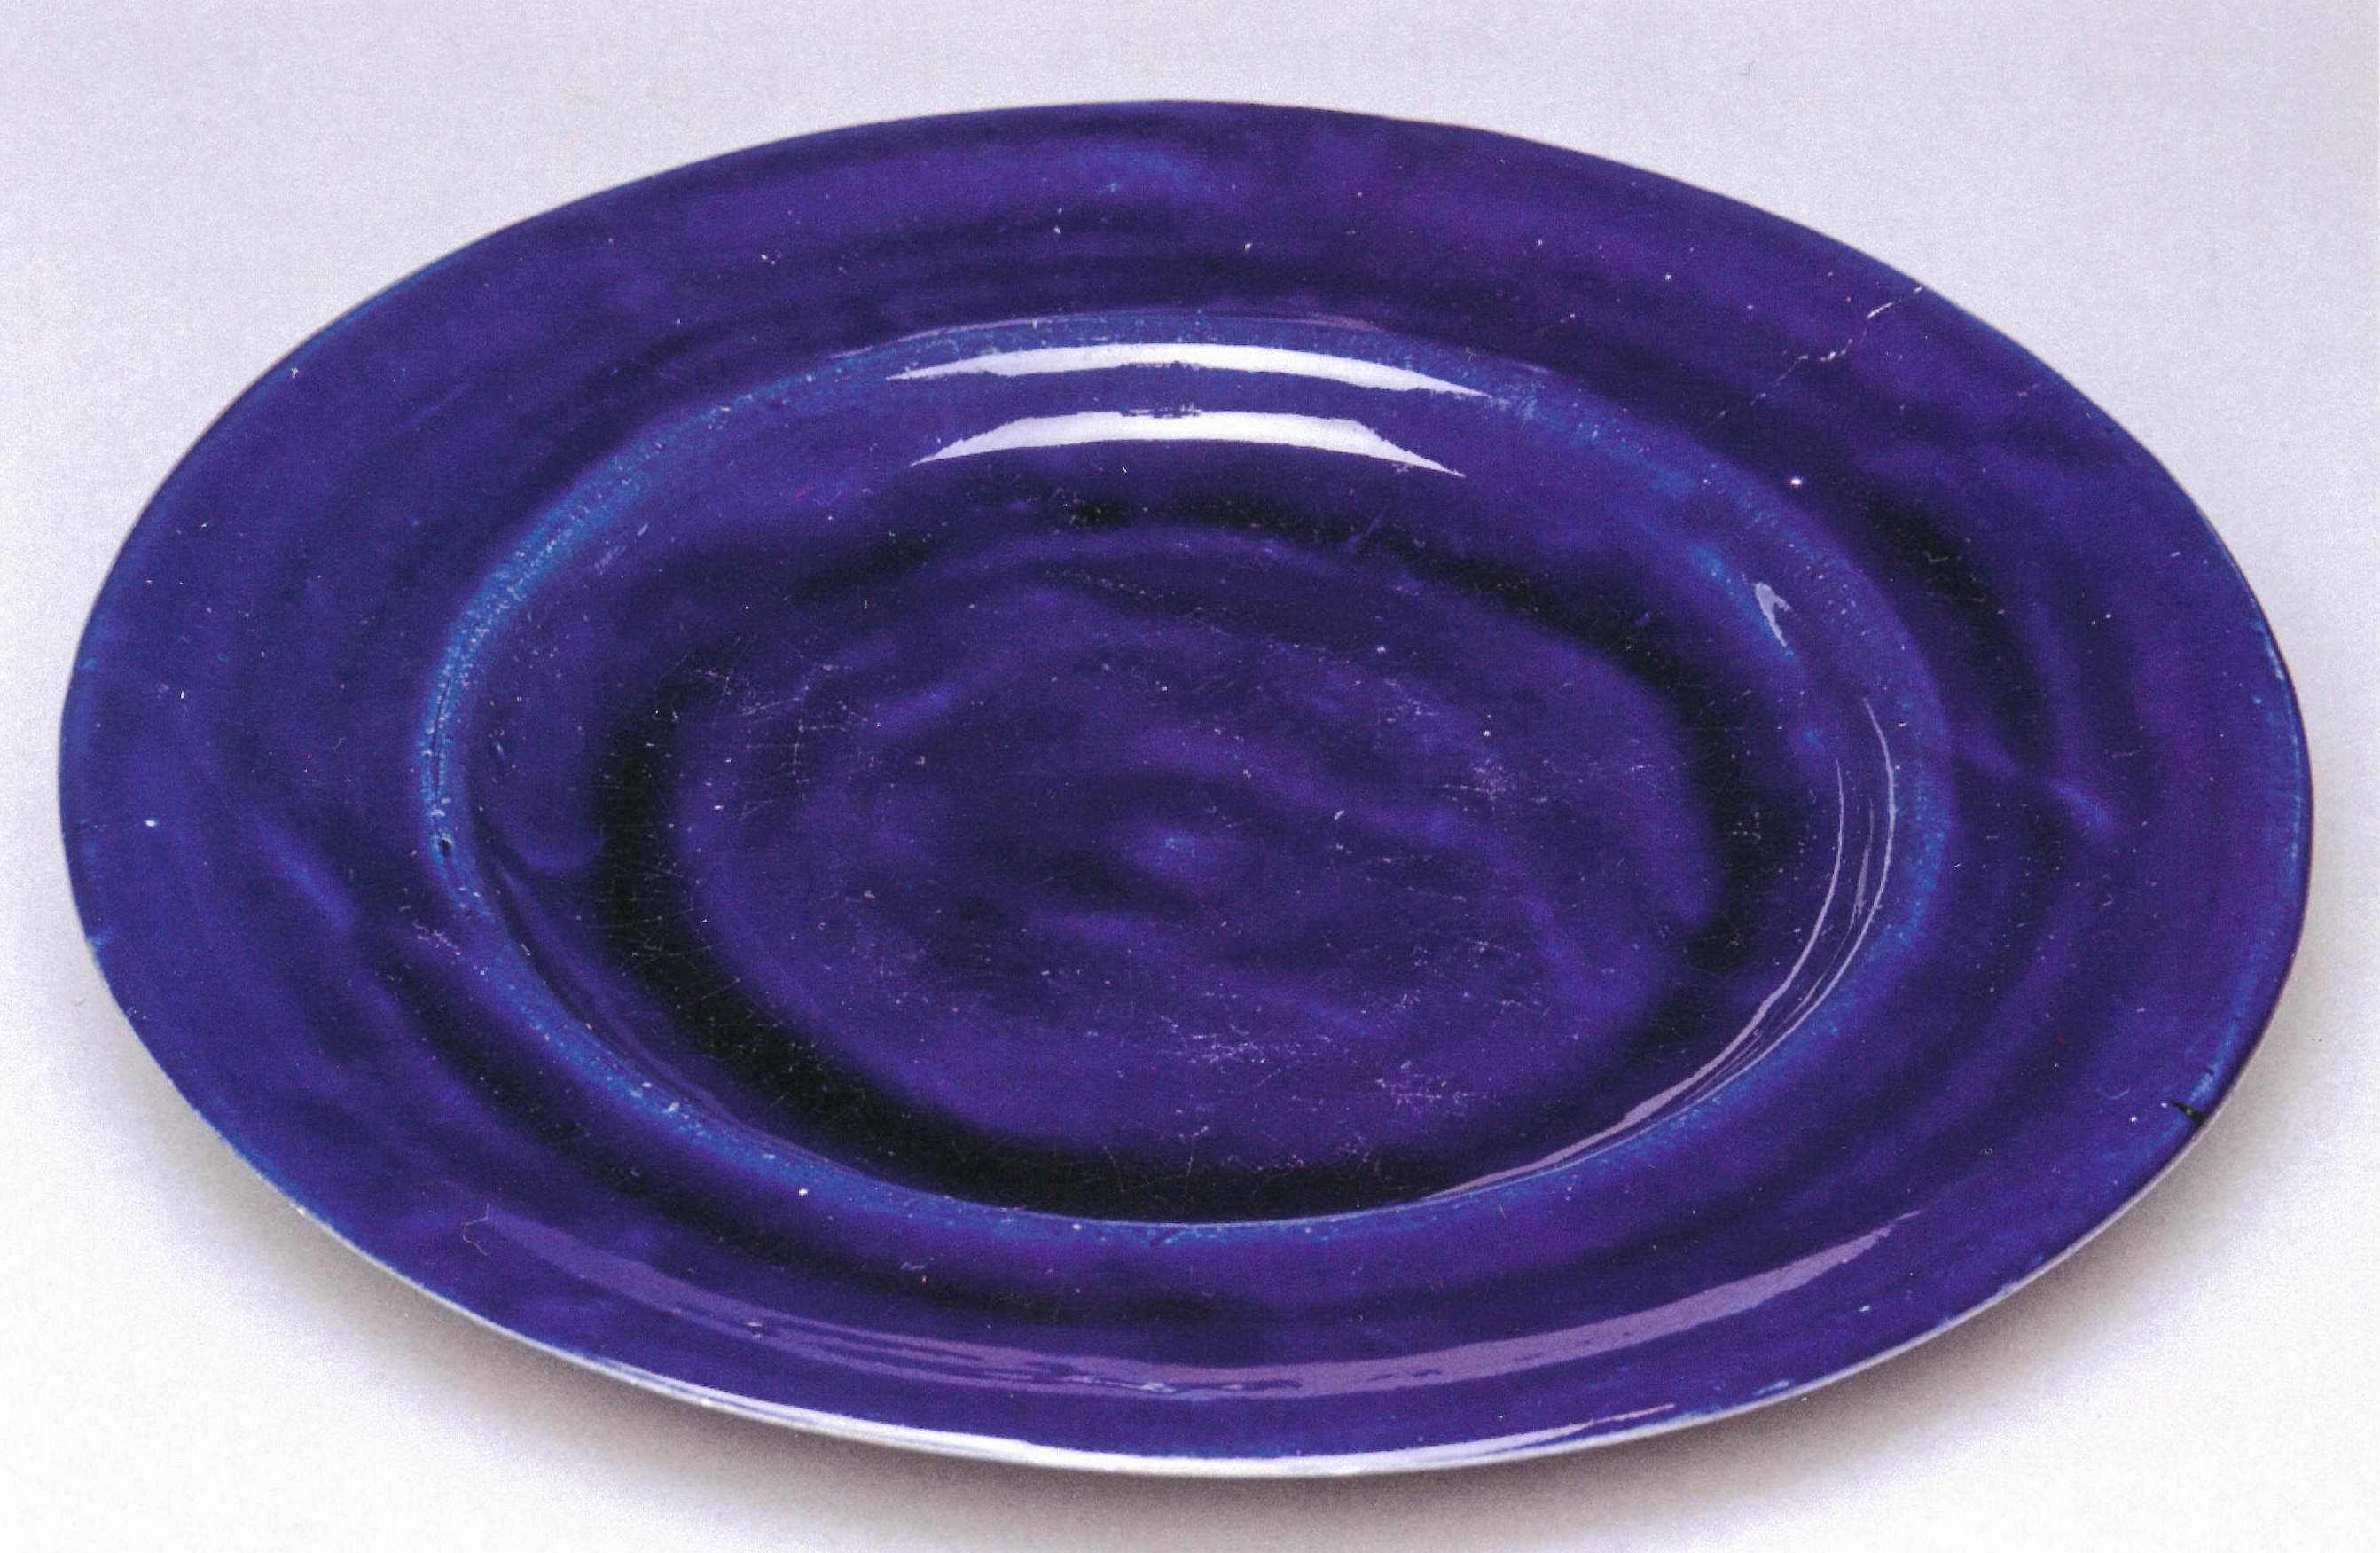 about 1914–16, earthenware with cobalt blue glaze, 25.4 cm diameter, private collection.